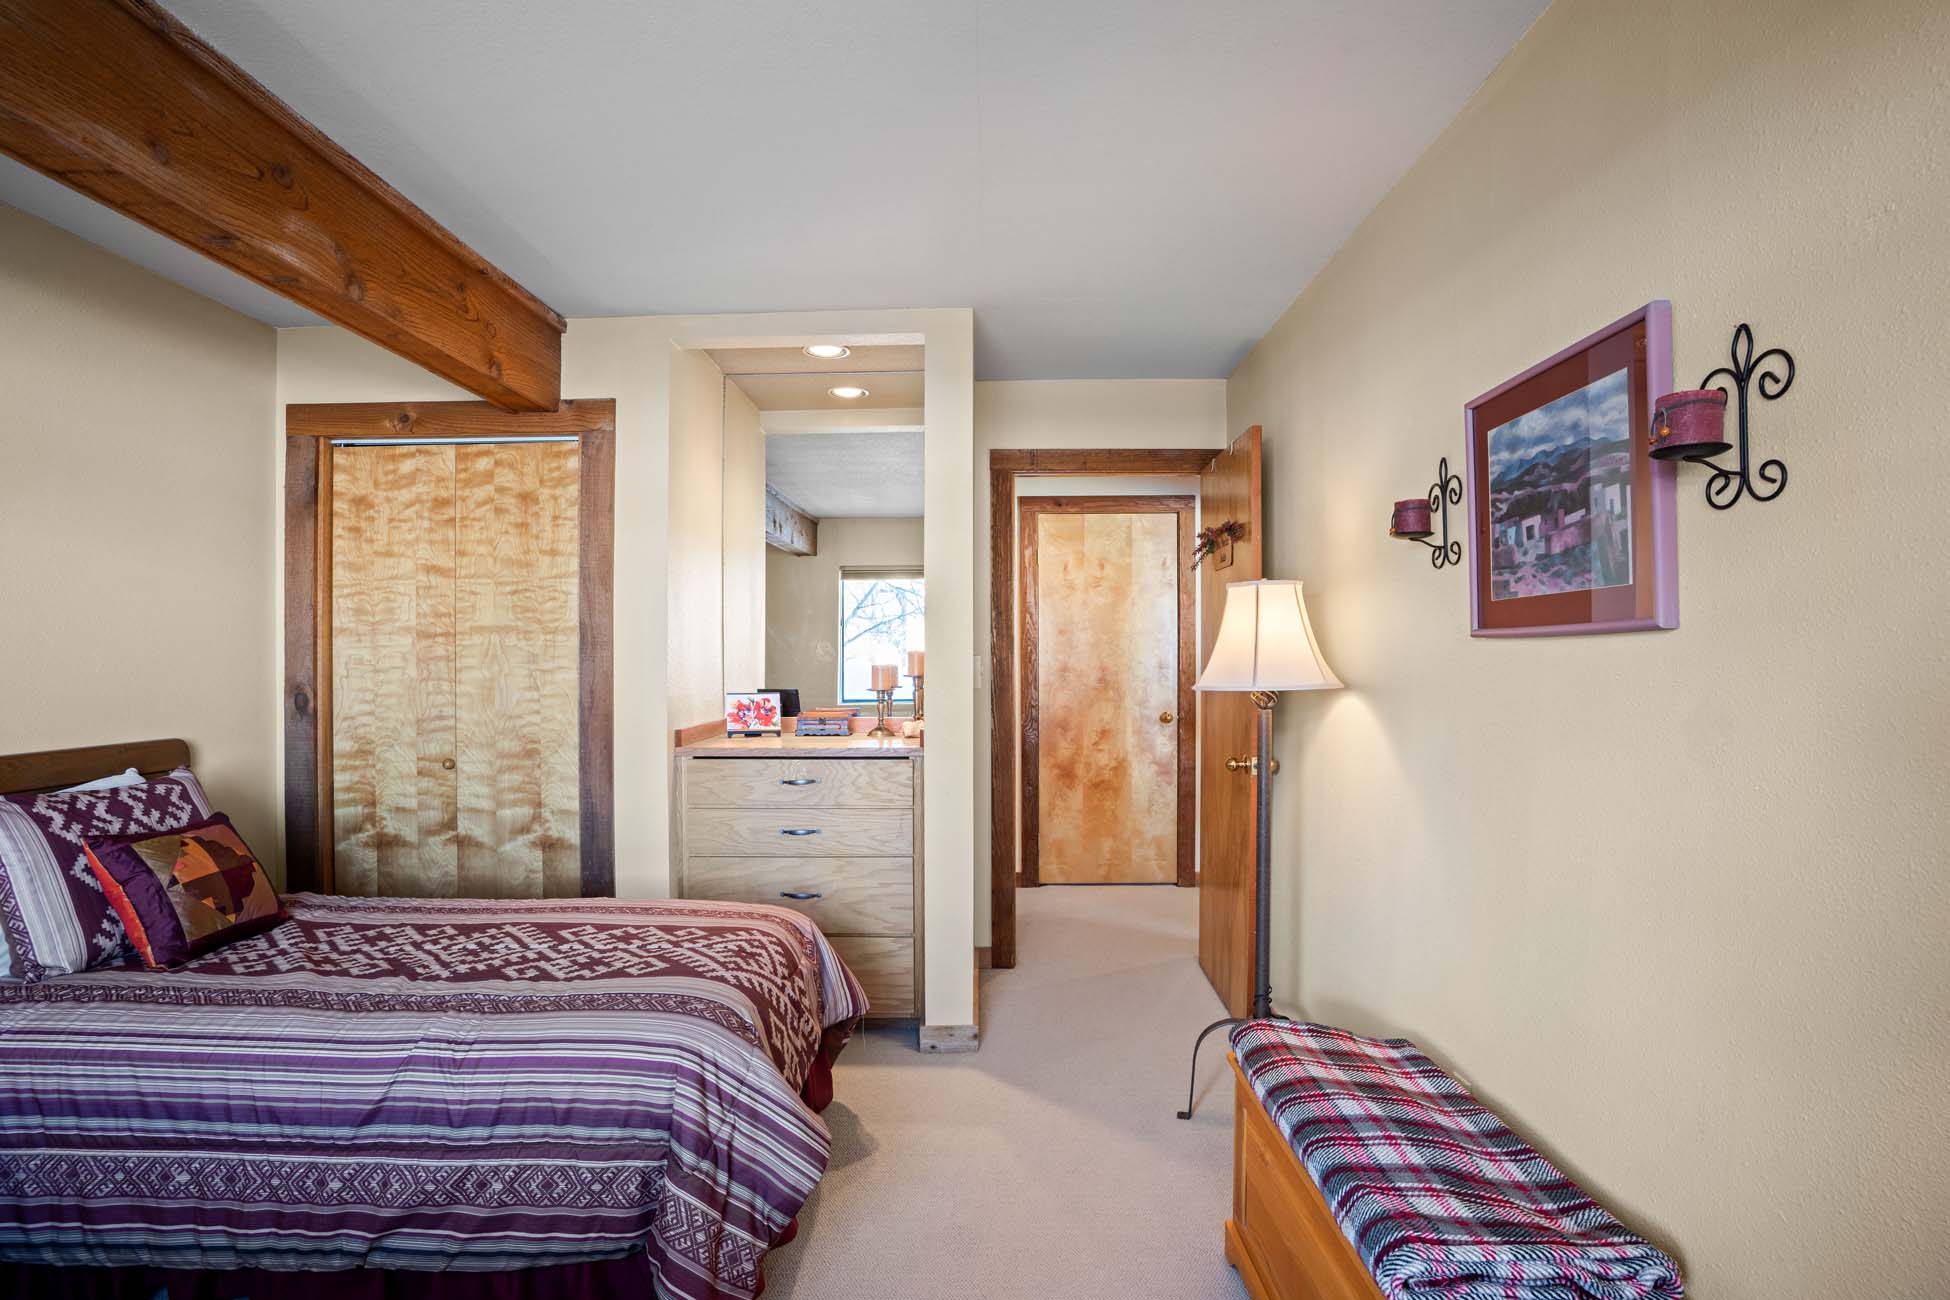 49 Powderview Drive, Crested Butte Colorado - bedroom